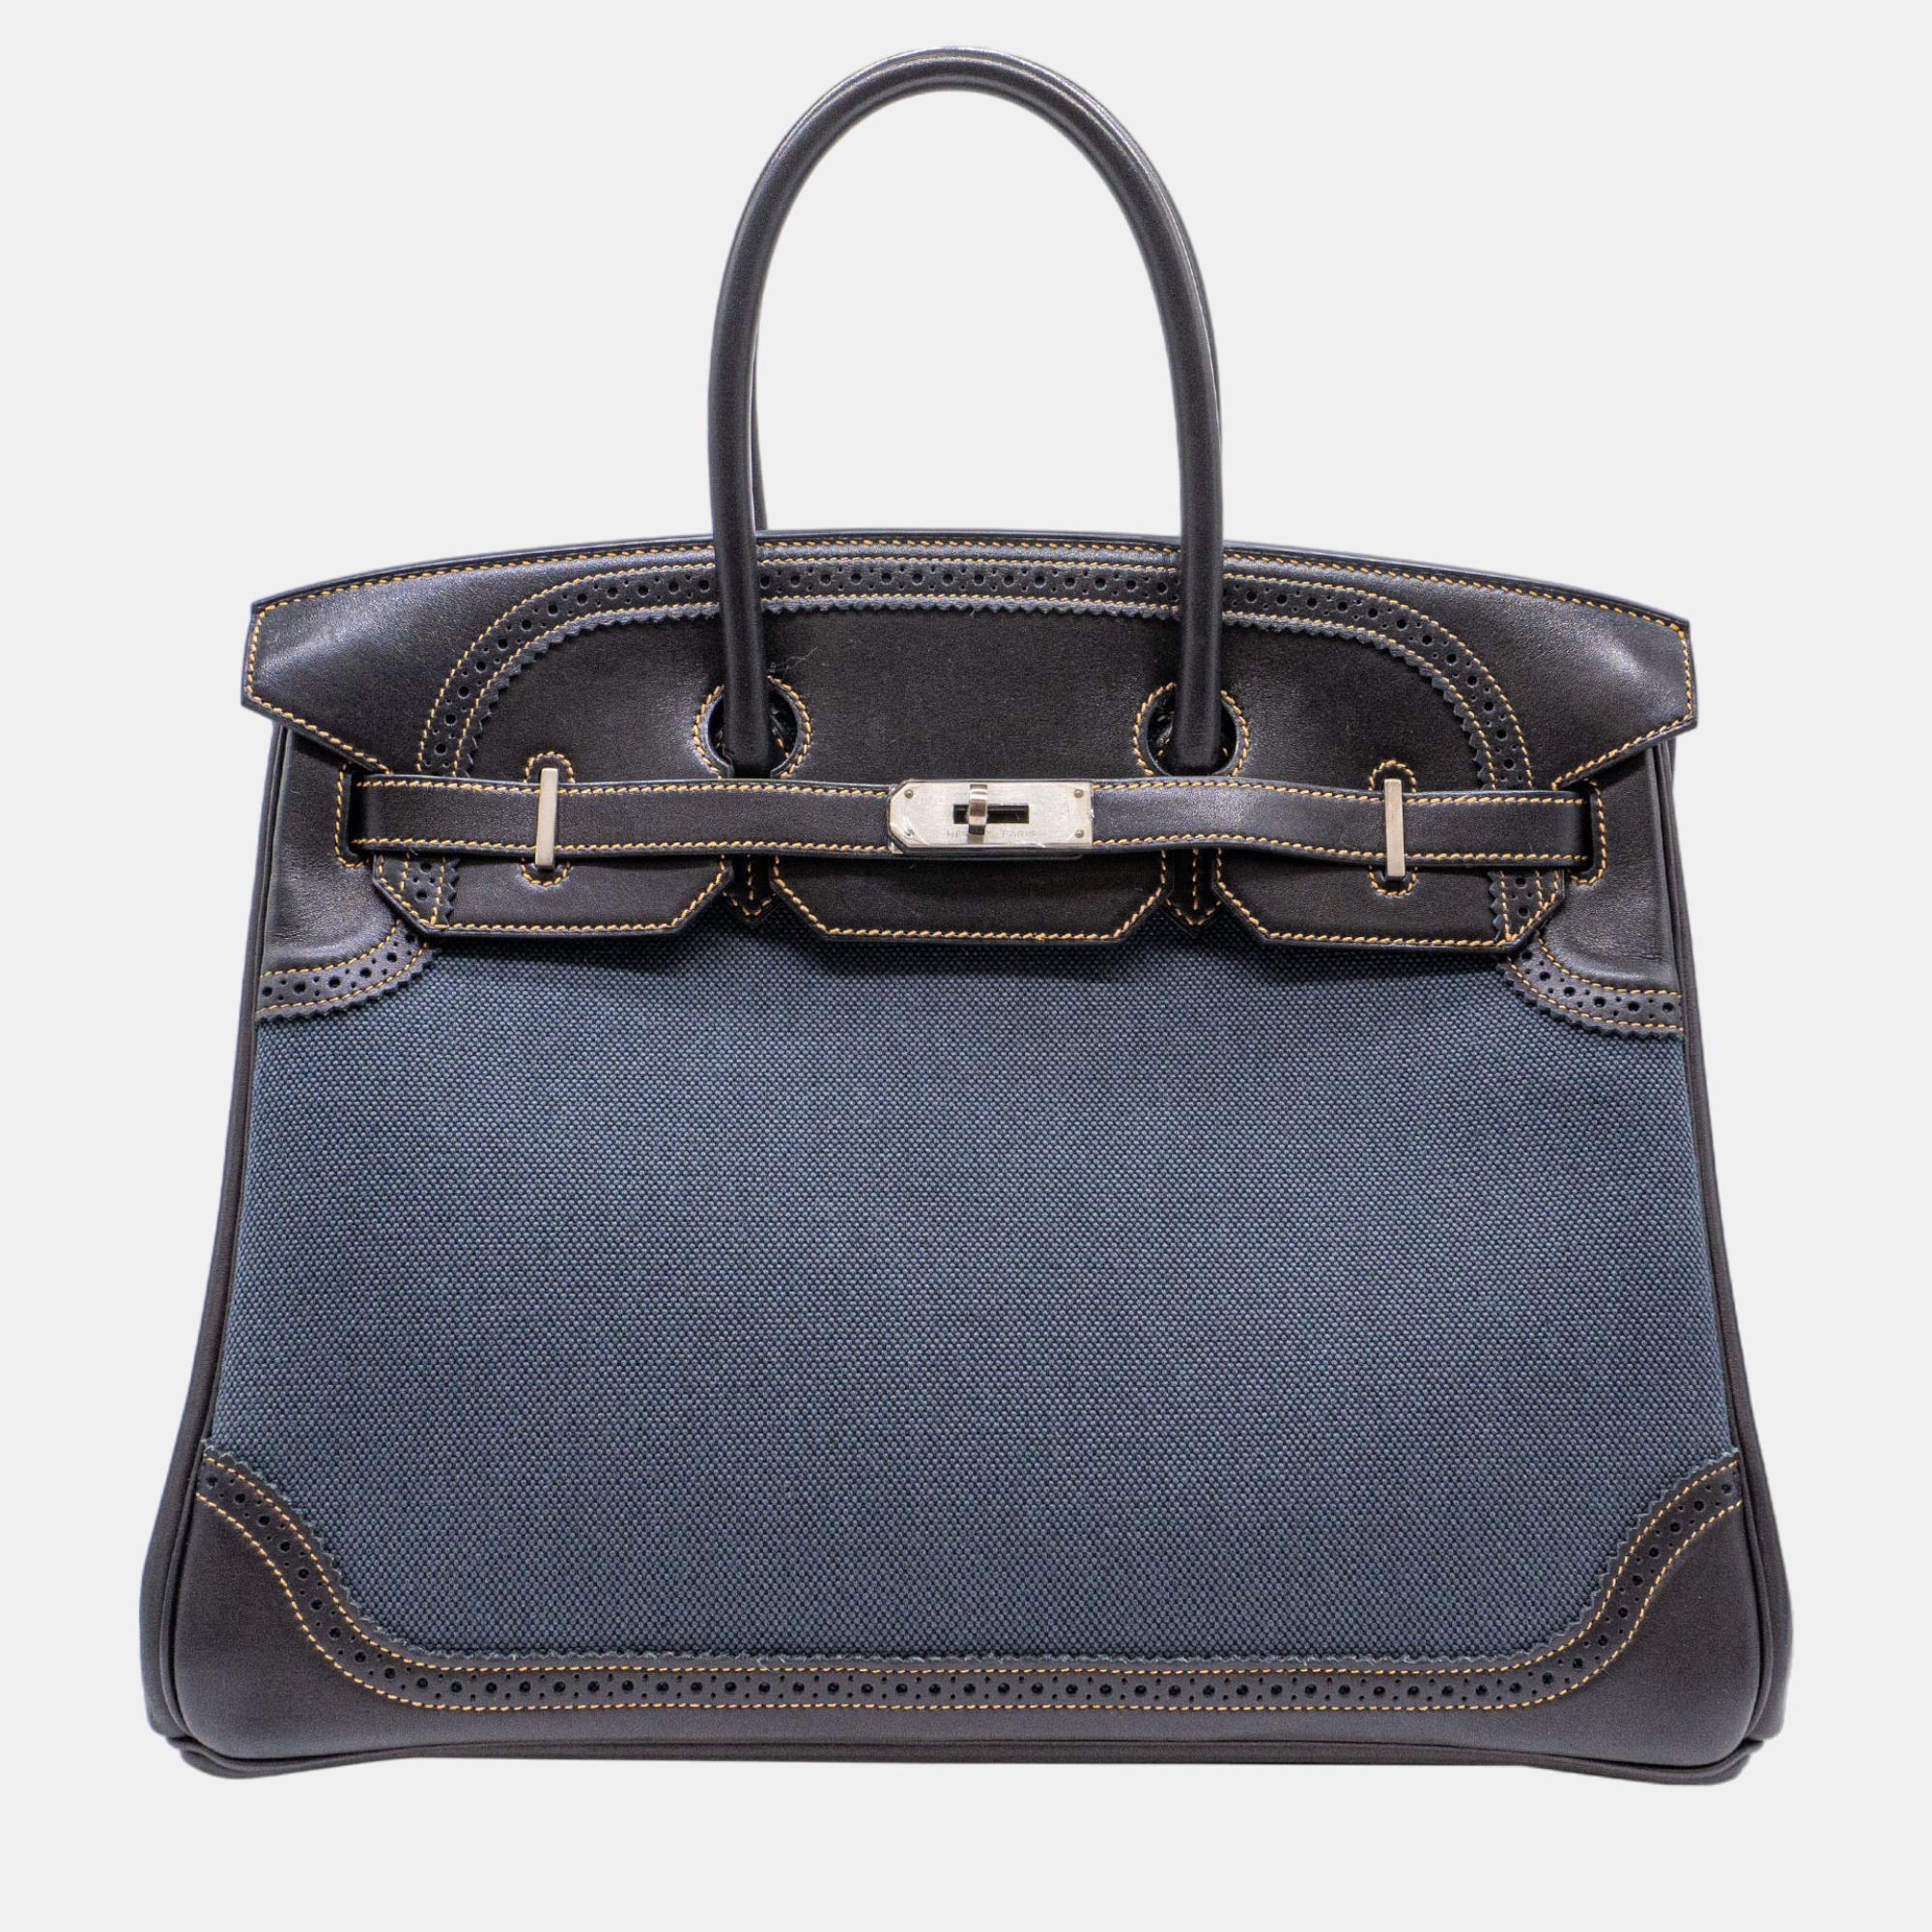 Hermes herm&egrave;s birkin 35 ghillies in denim fonce toile & black evercalf leather with phw bag